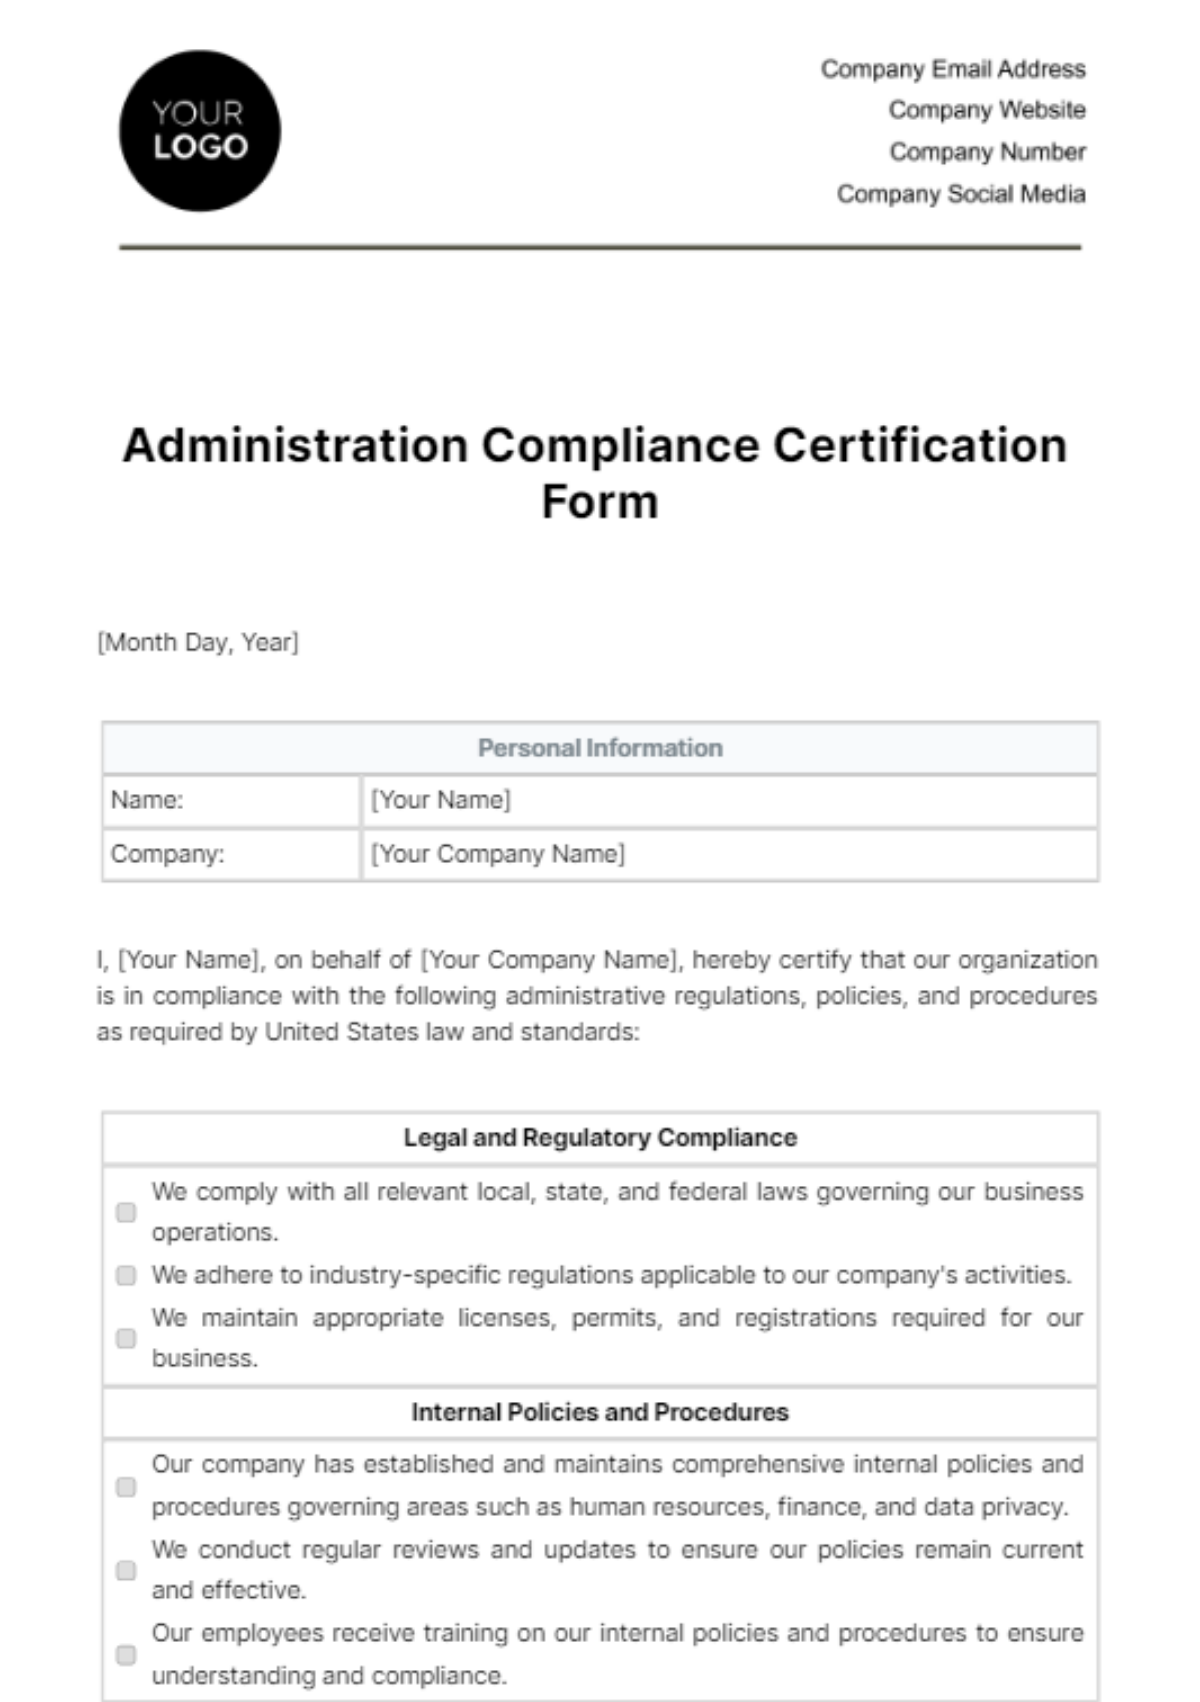 Free Administration Compliance Certification Form Template